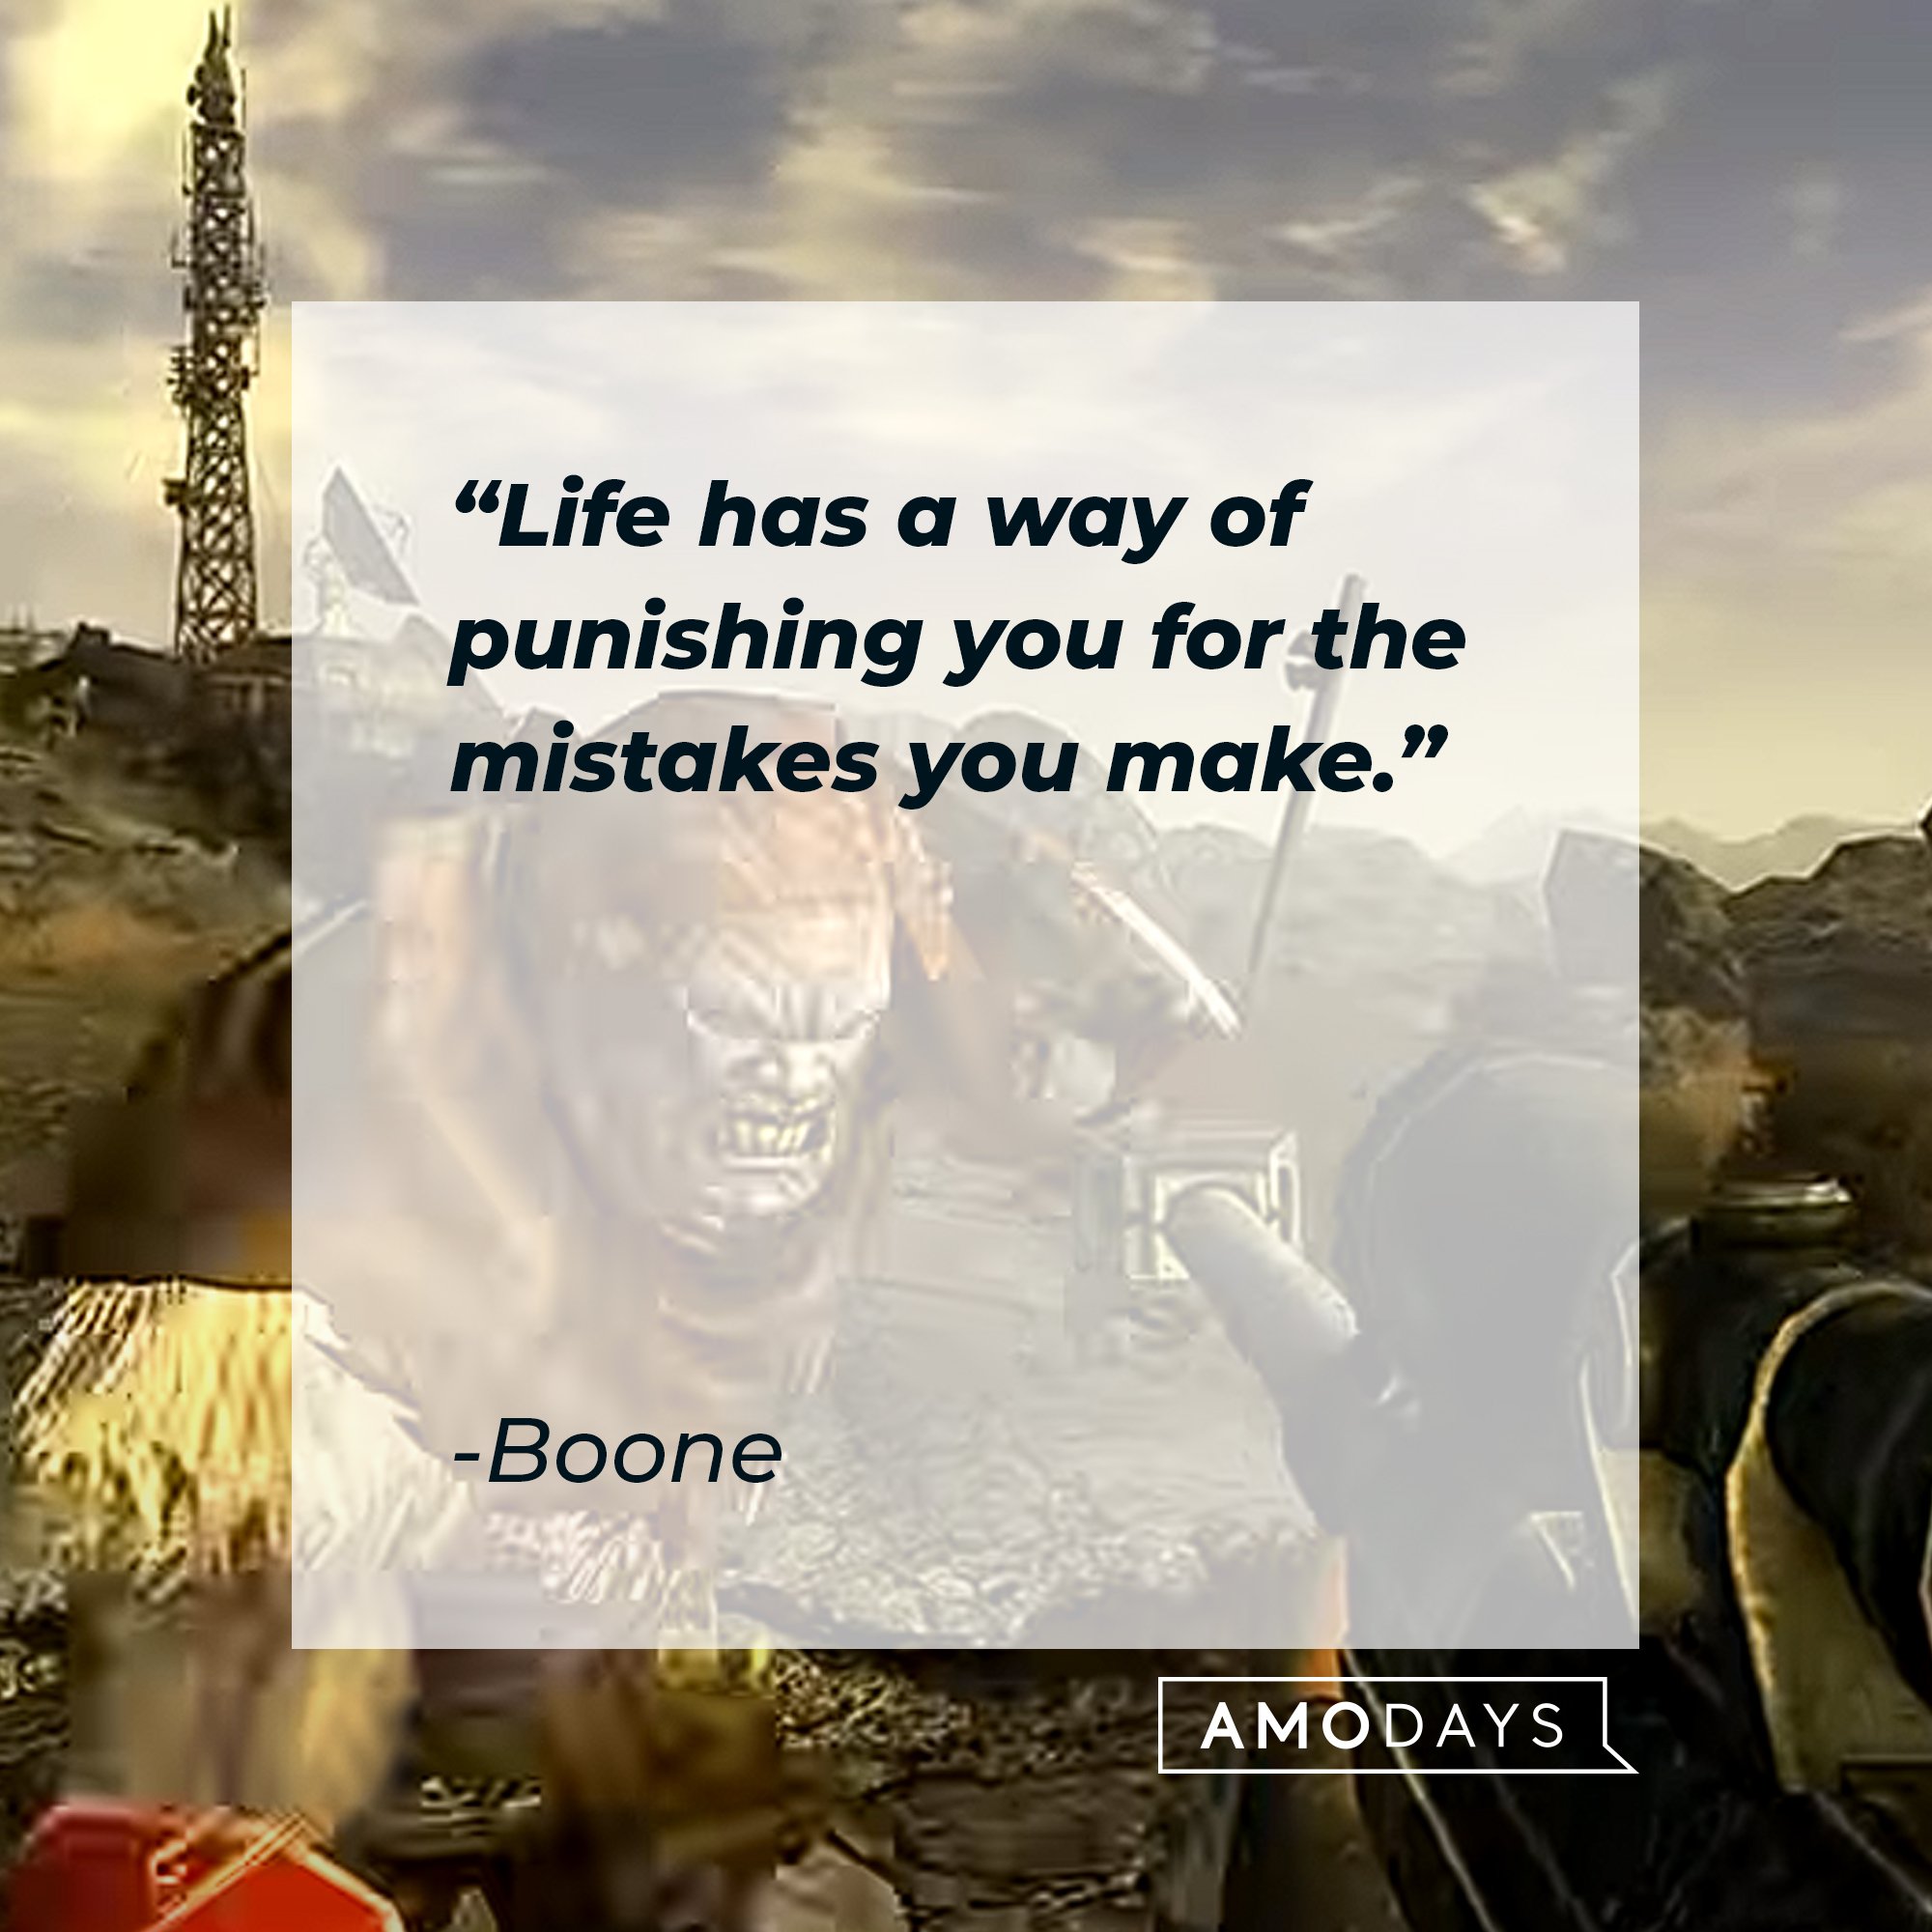 Boone’s quote: "Life has a way of punishing you for the mistakes you make." | Image: AmoDays